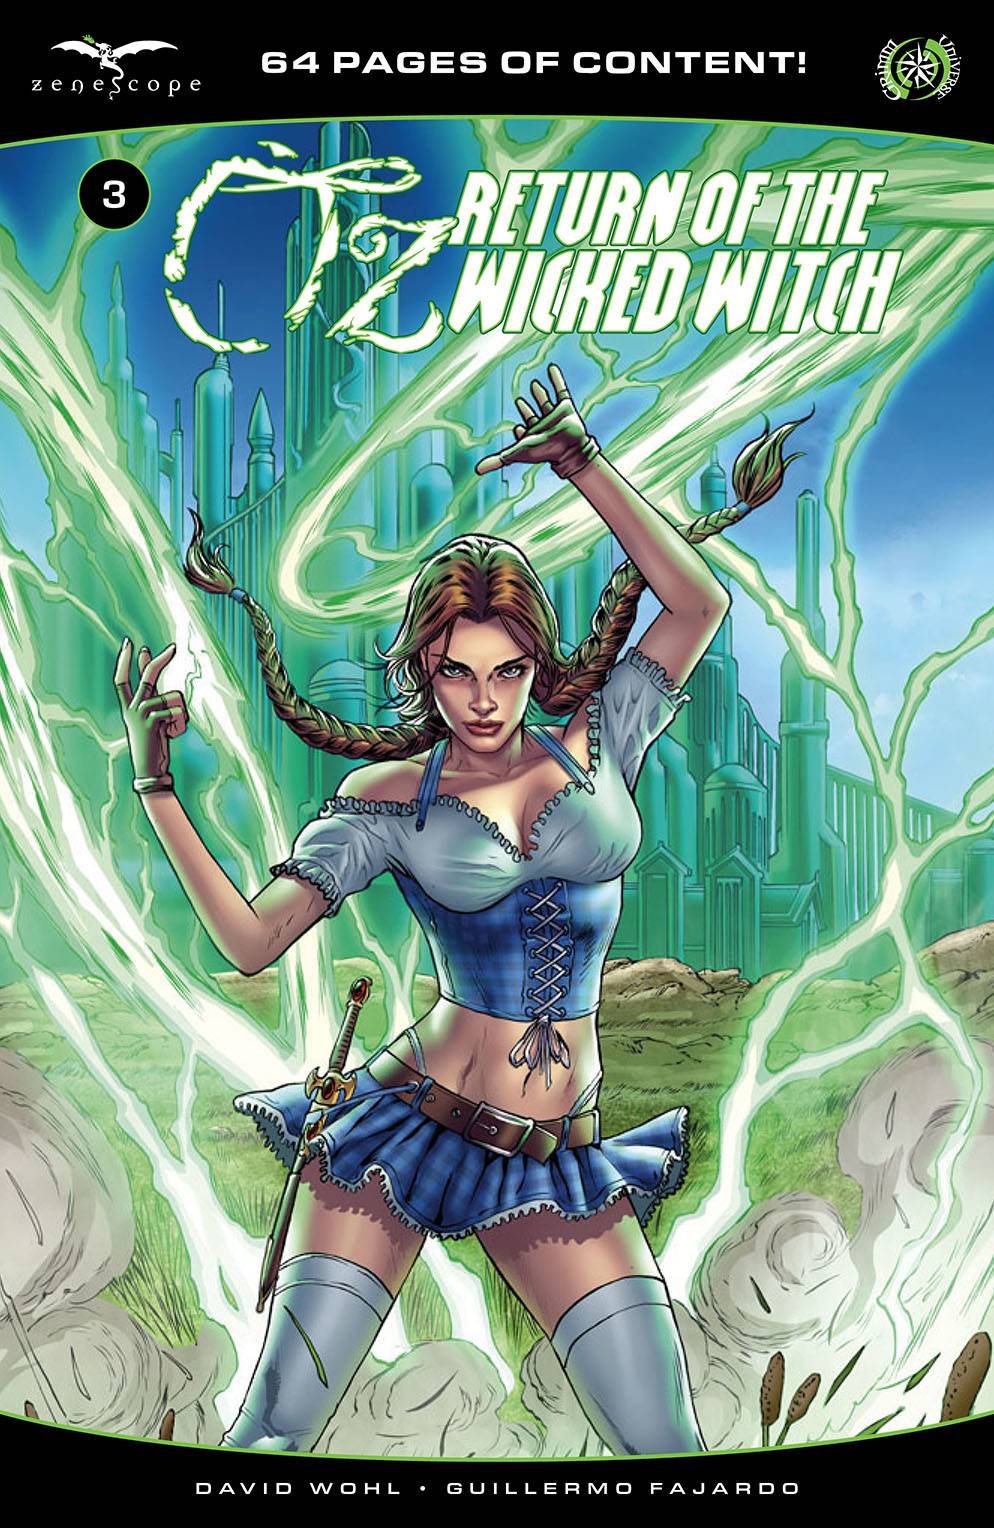 OCT222077 - OZ RETURN OF WICKED WITCH #3 (OF 3) CVR A VITORINO - Previews  World